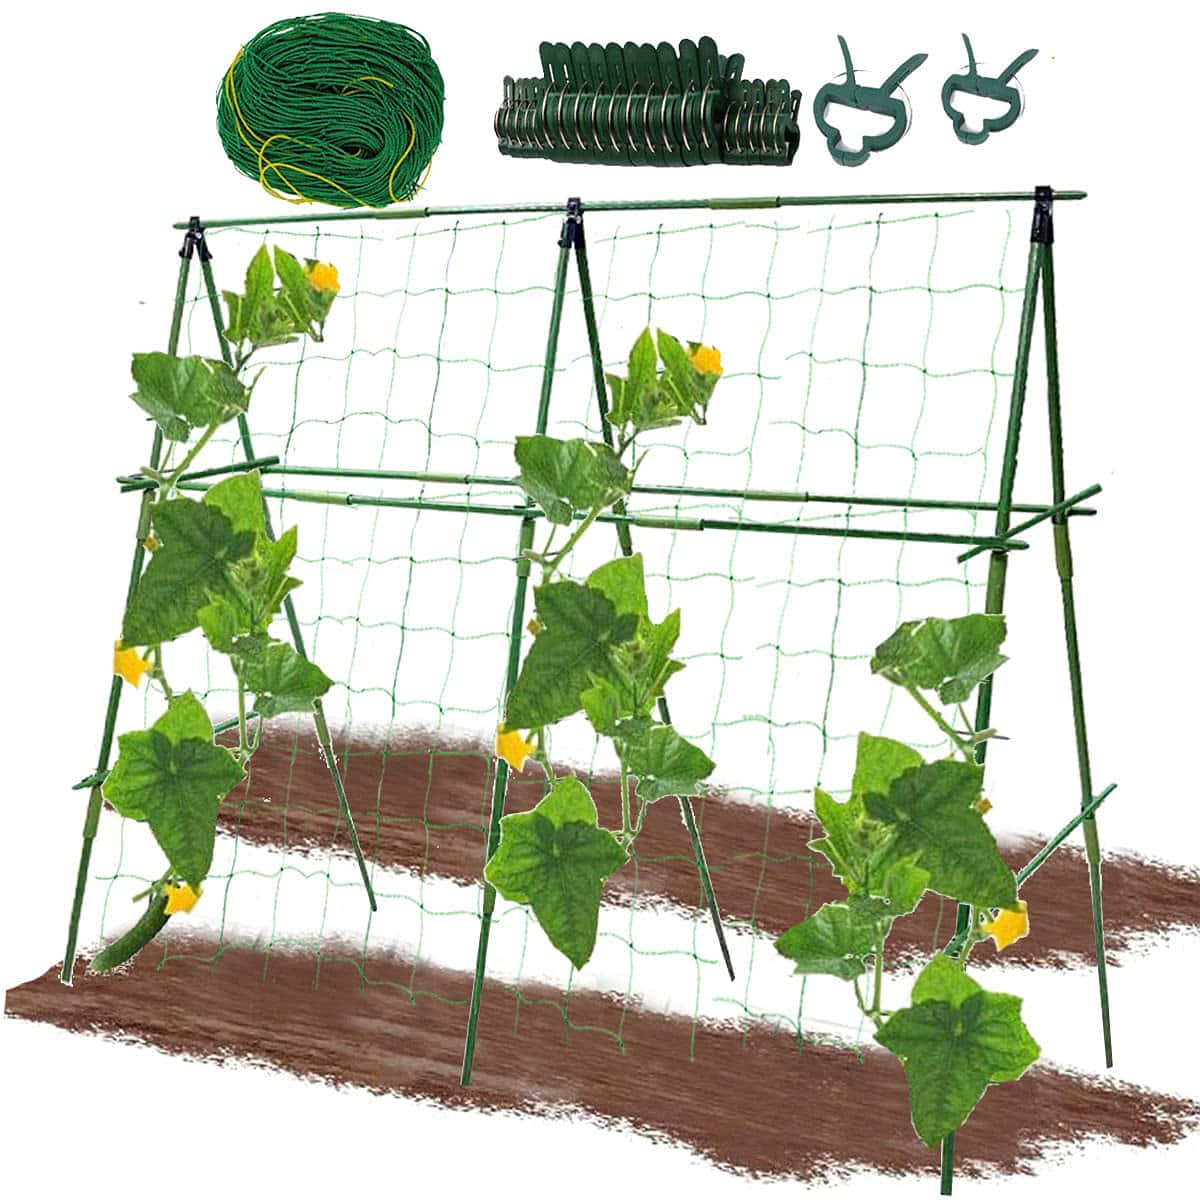 A Garden Trellis With A Cucumber Growing On It